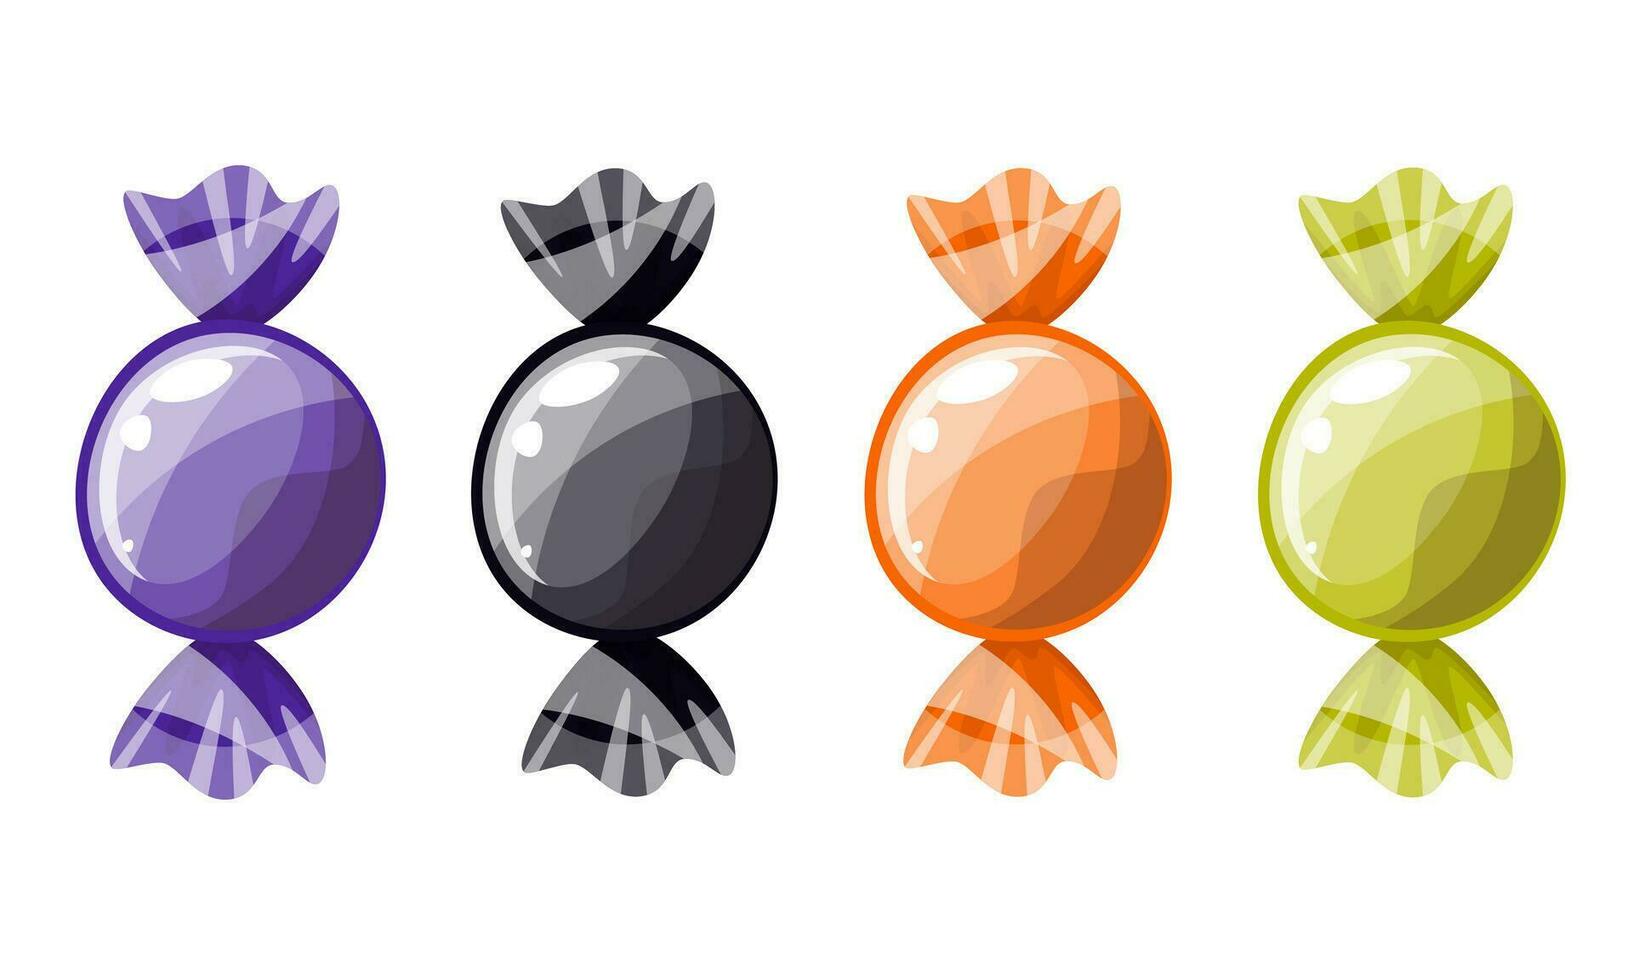 A set of candies, lollipops in different wrappers in Halloween style. Trick or treat, Halloween holiday. Elements for design. Cartoon vector illustration